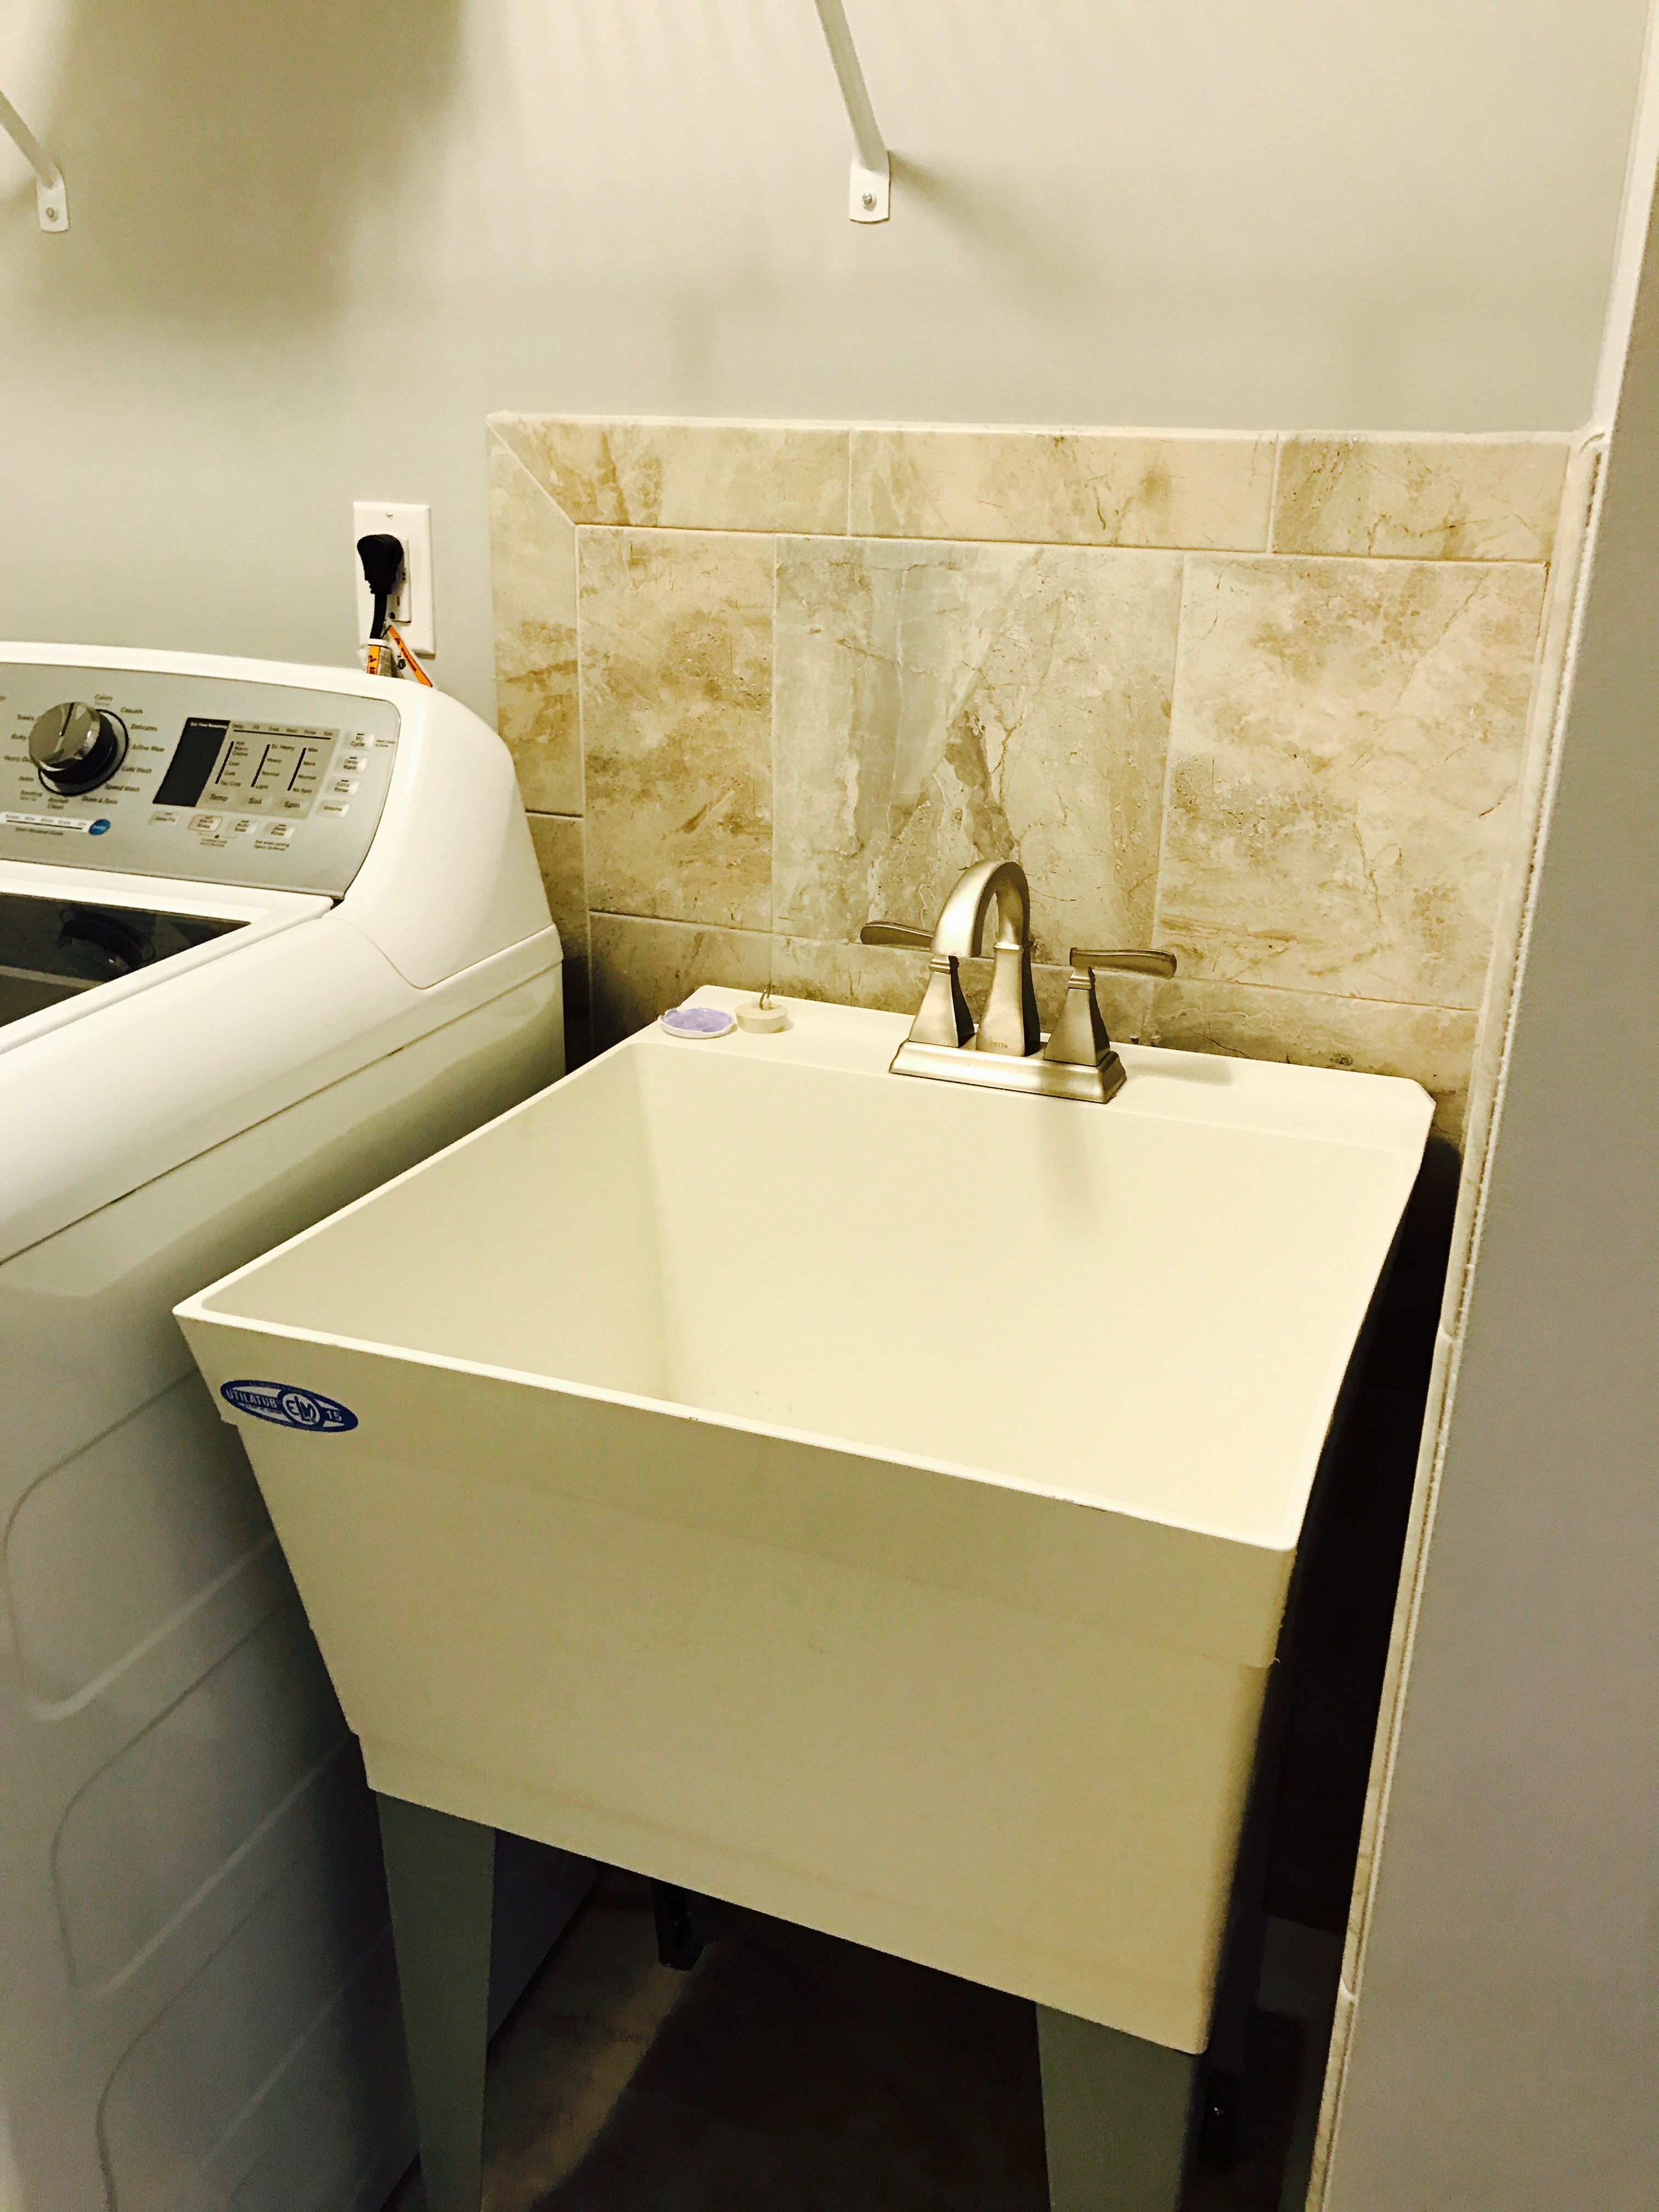 utility room in laundry room blount's complete home services fire water restoration termite pest control augusta ga